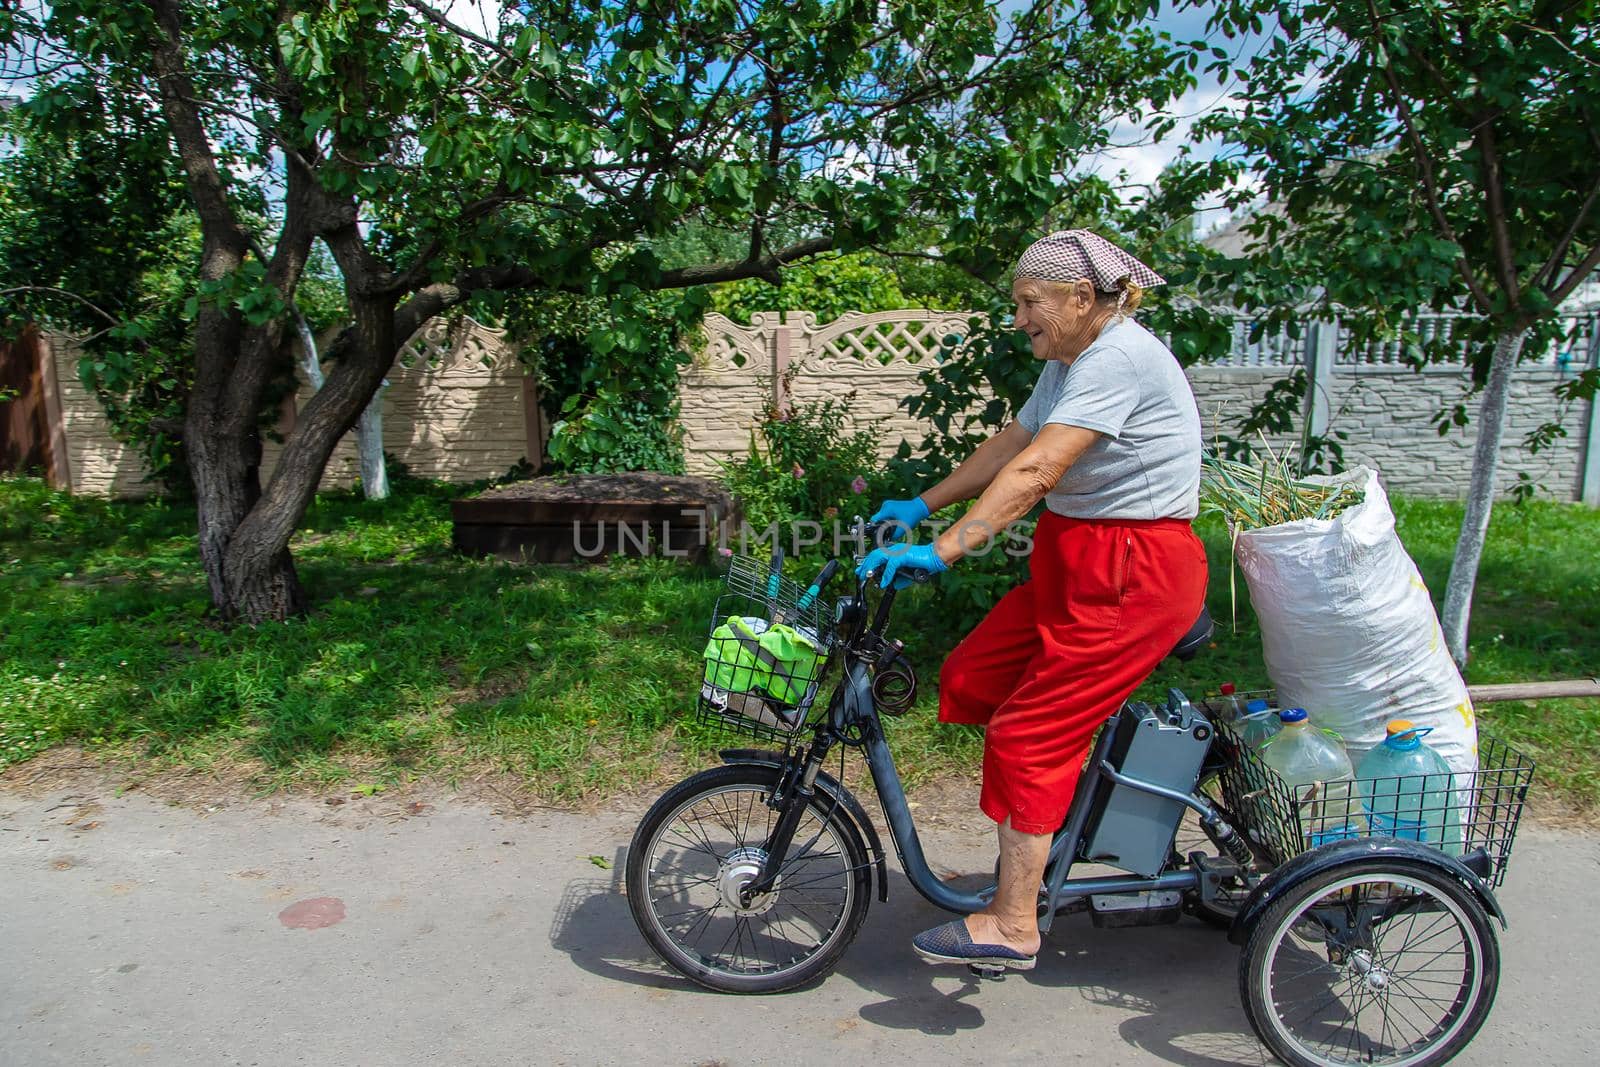 An old woman rides a bicycle. Selection focus. Nature.